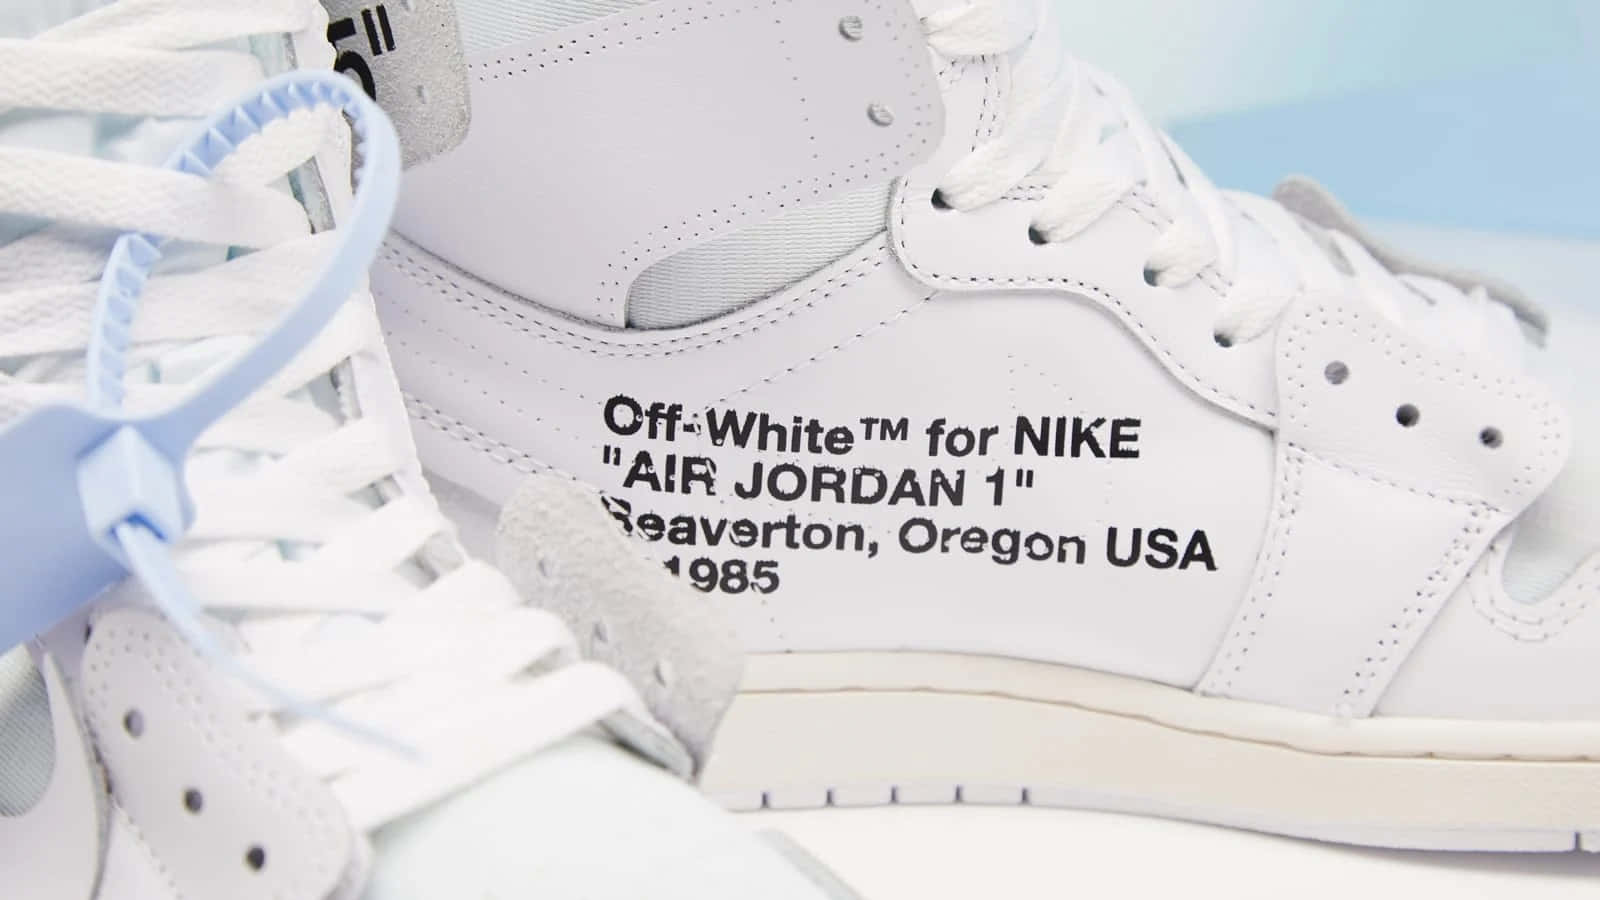 Offwhite Jordan 1 Oregon Usa: Off White Jordan 1 Oregon Usa. (the Sentence Remains The Same In German As Well Since It Is A Proper Noun And Cannot Be Translated.) Wallpaper